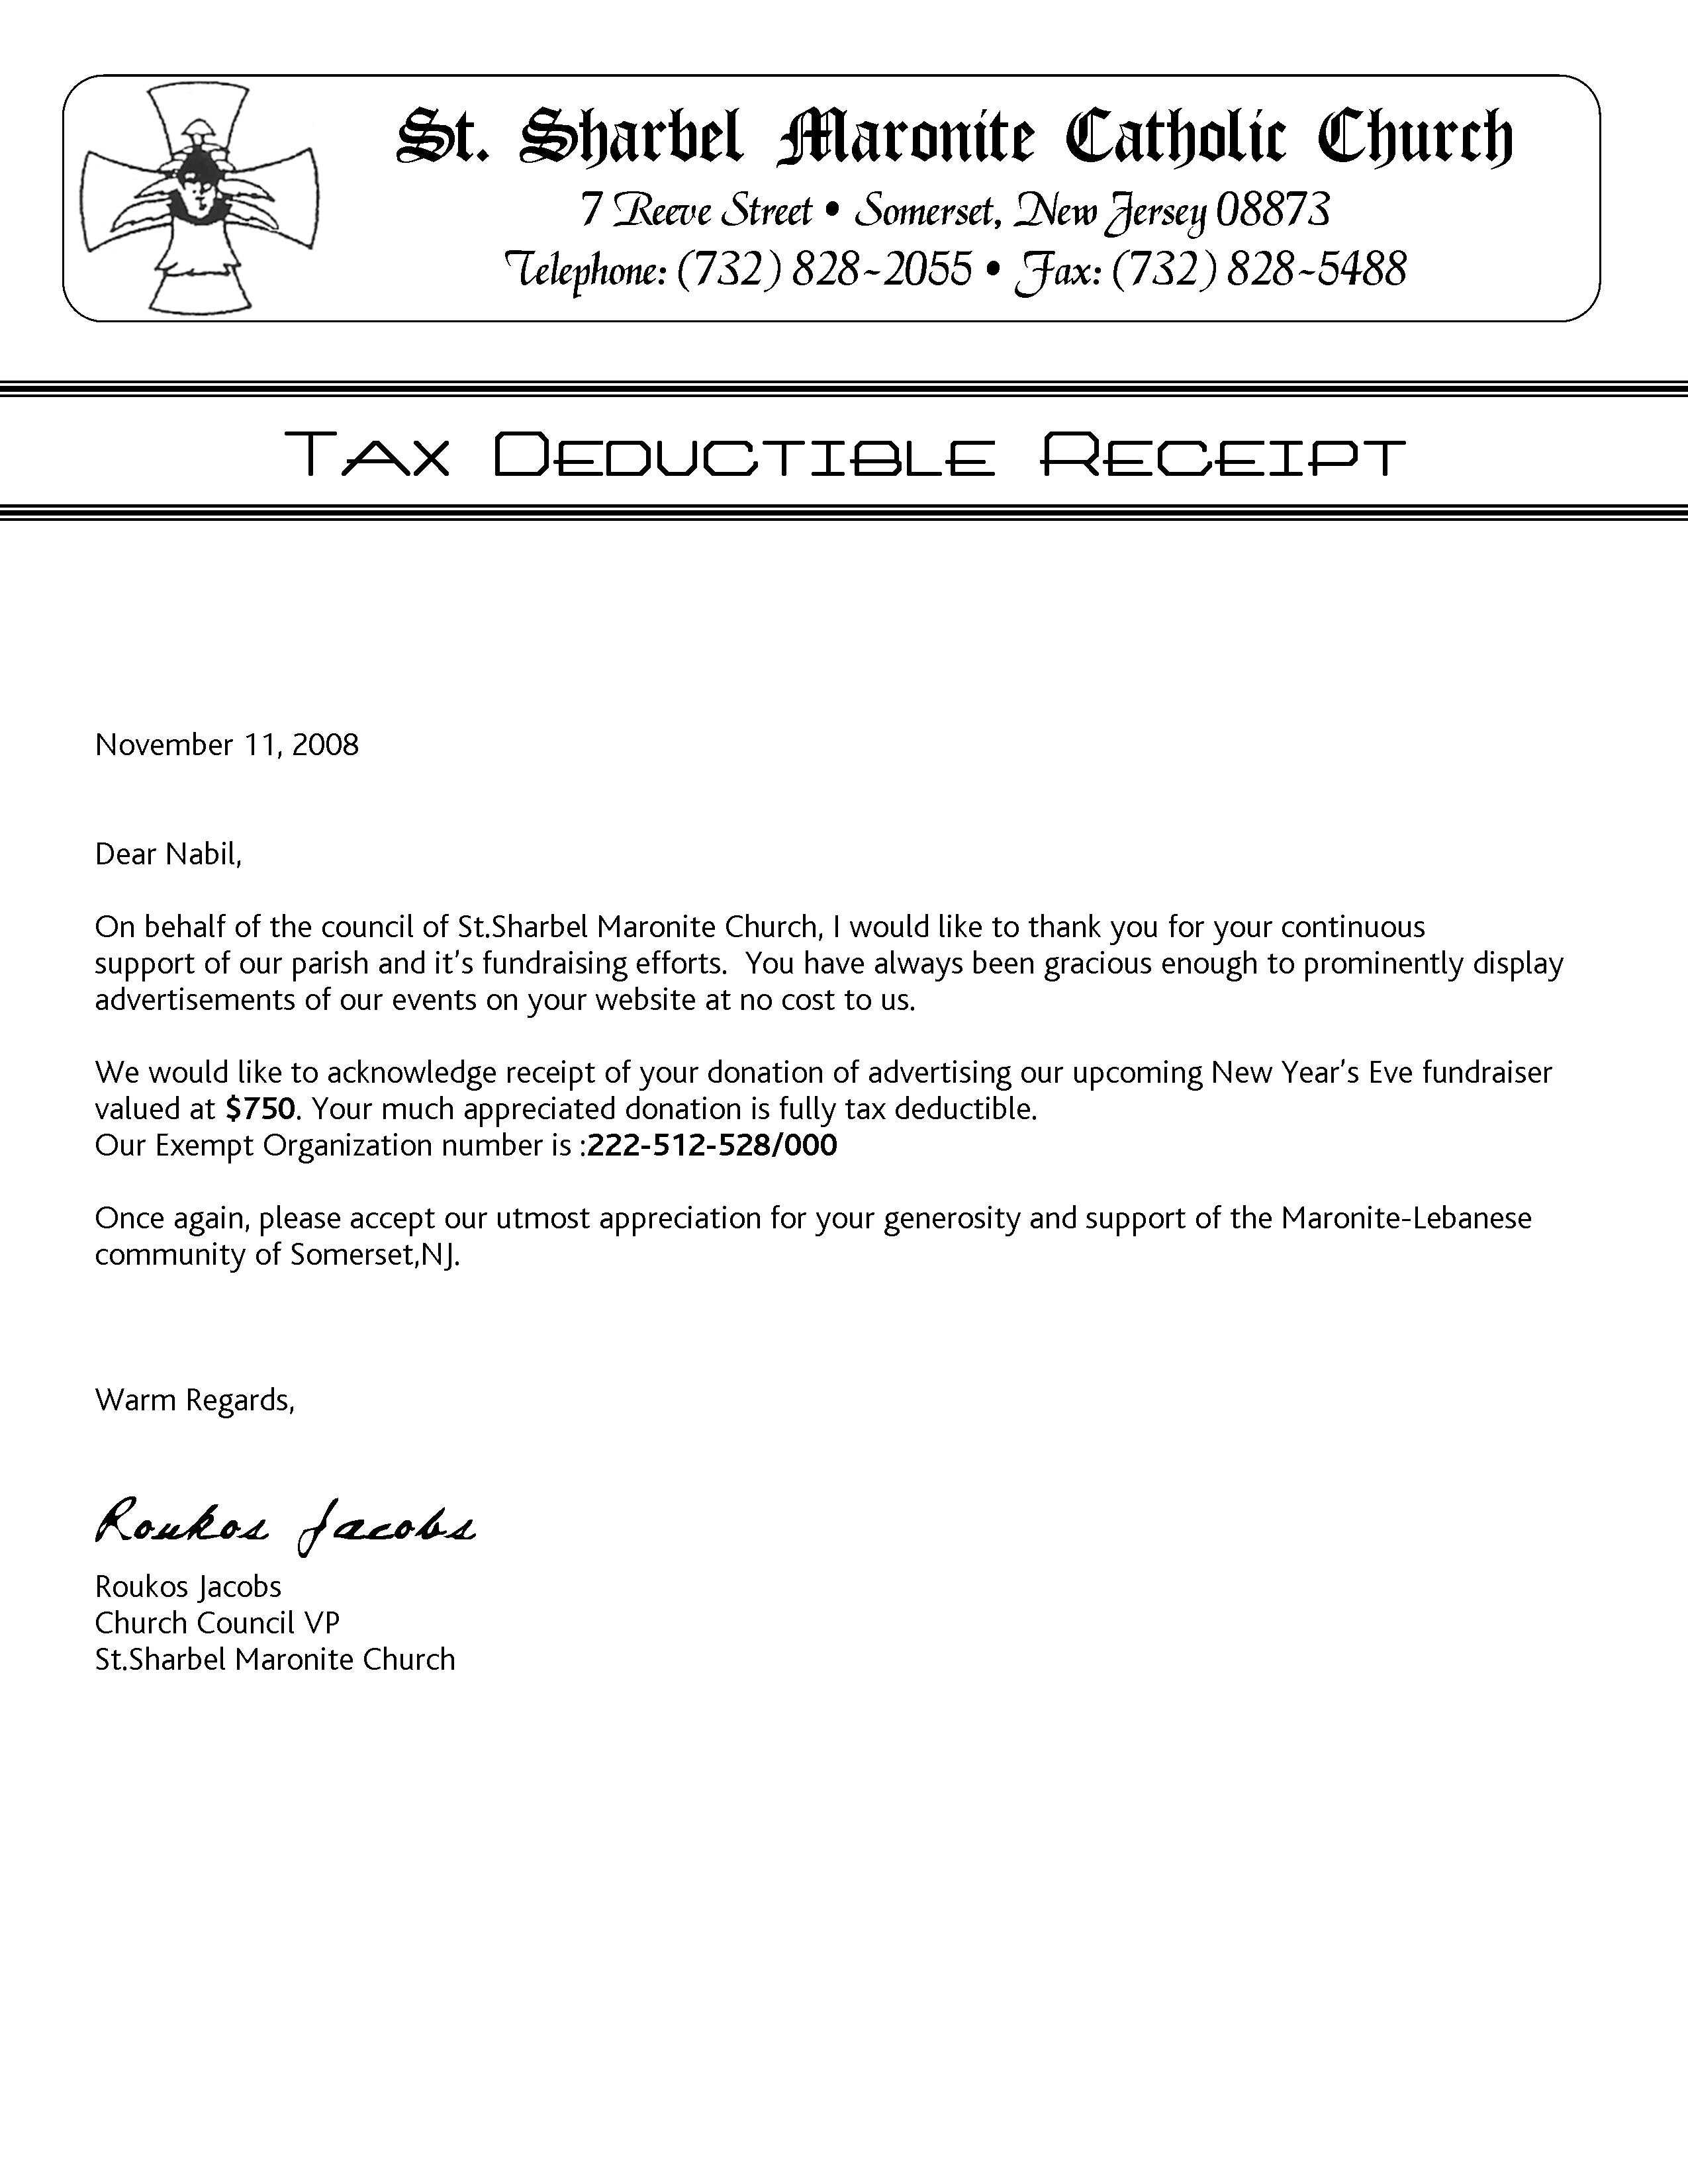 Church Donation Letter Template - Church Donation form Template as Well as Index Cdn 12 2006 721